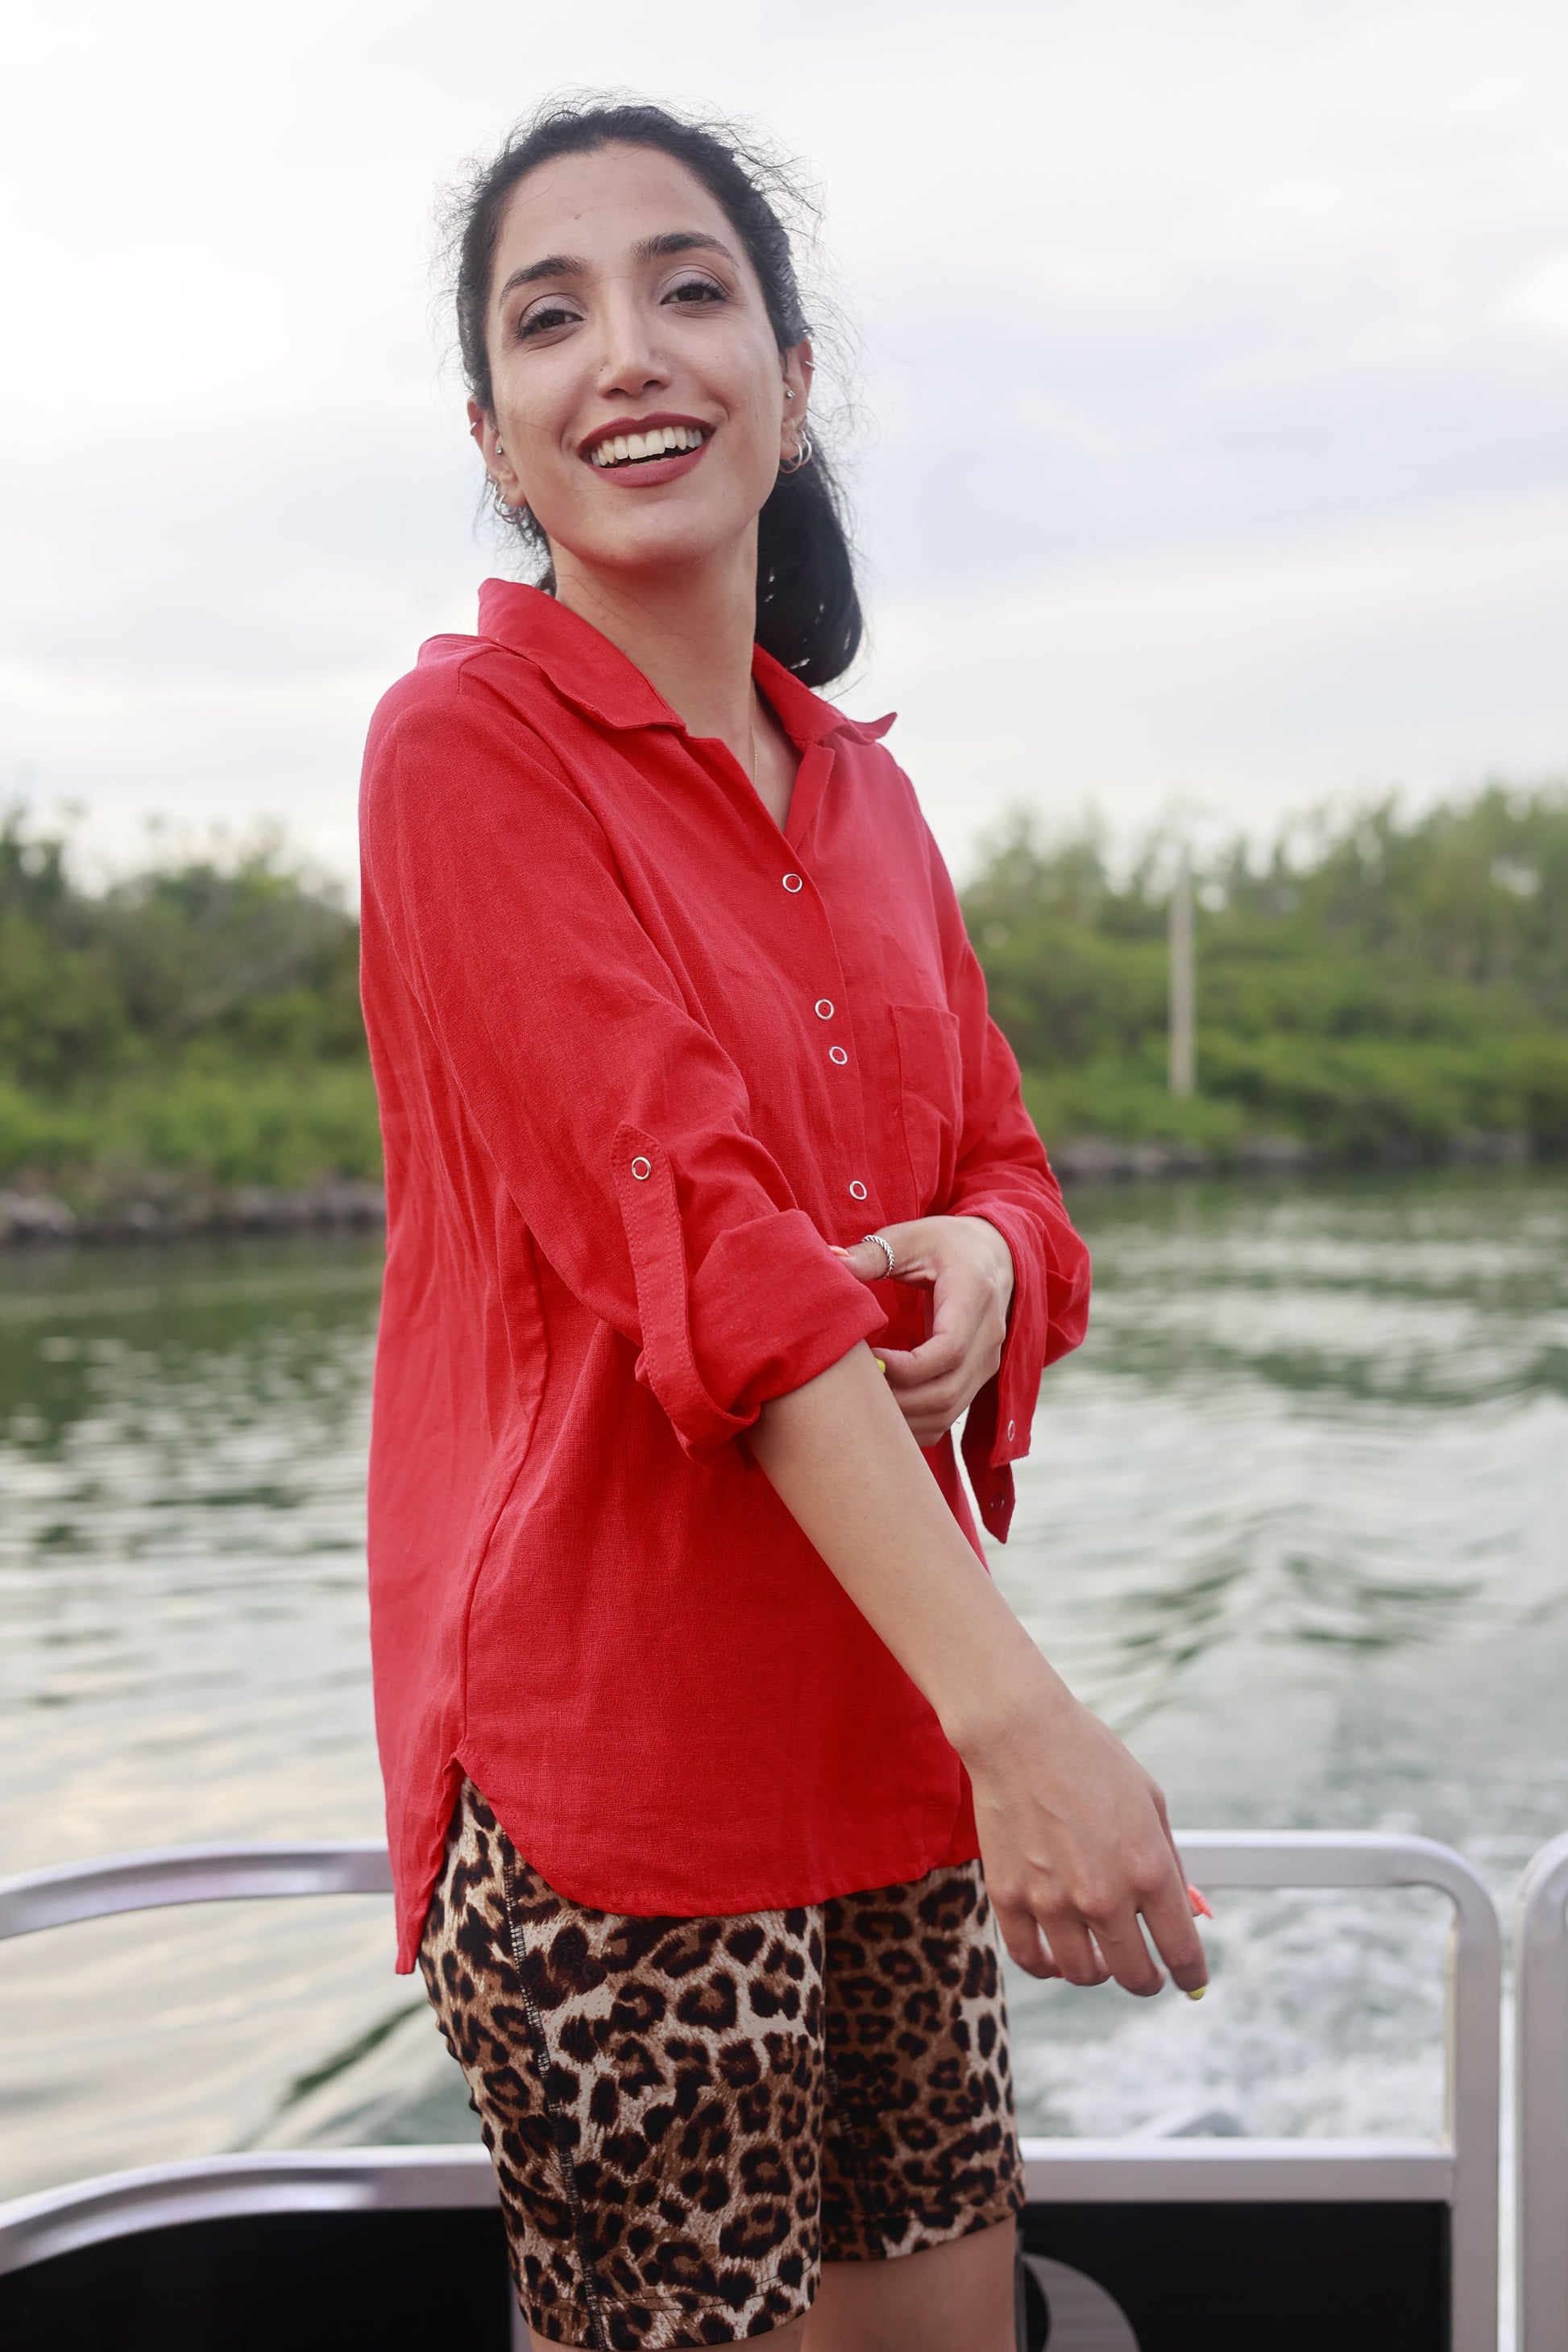 Sanaz wears the Red Linen Shirt with long sleeves by ELZi.